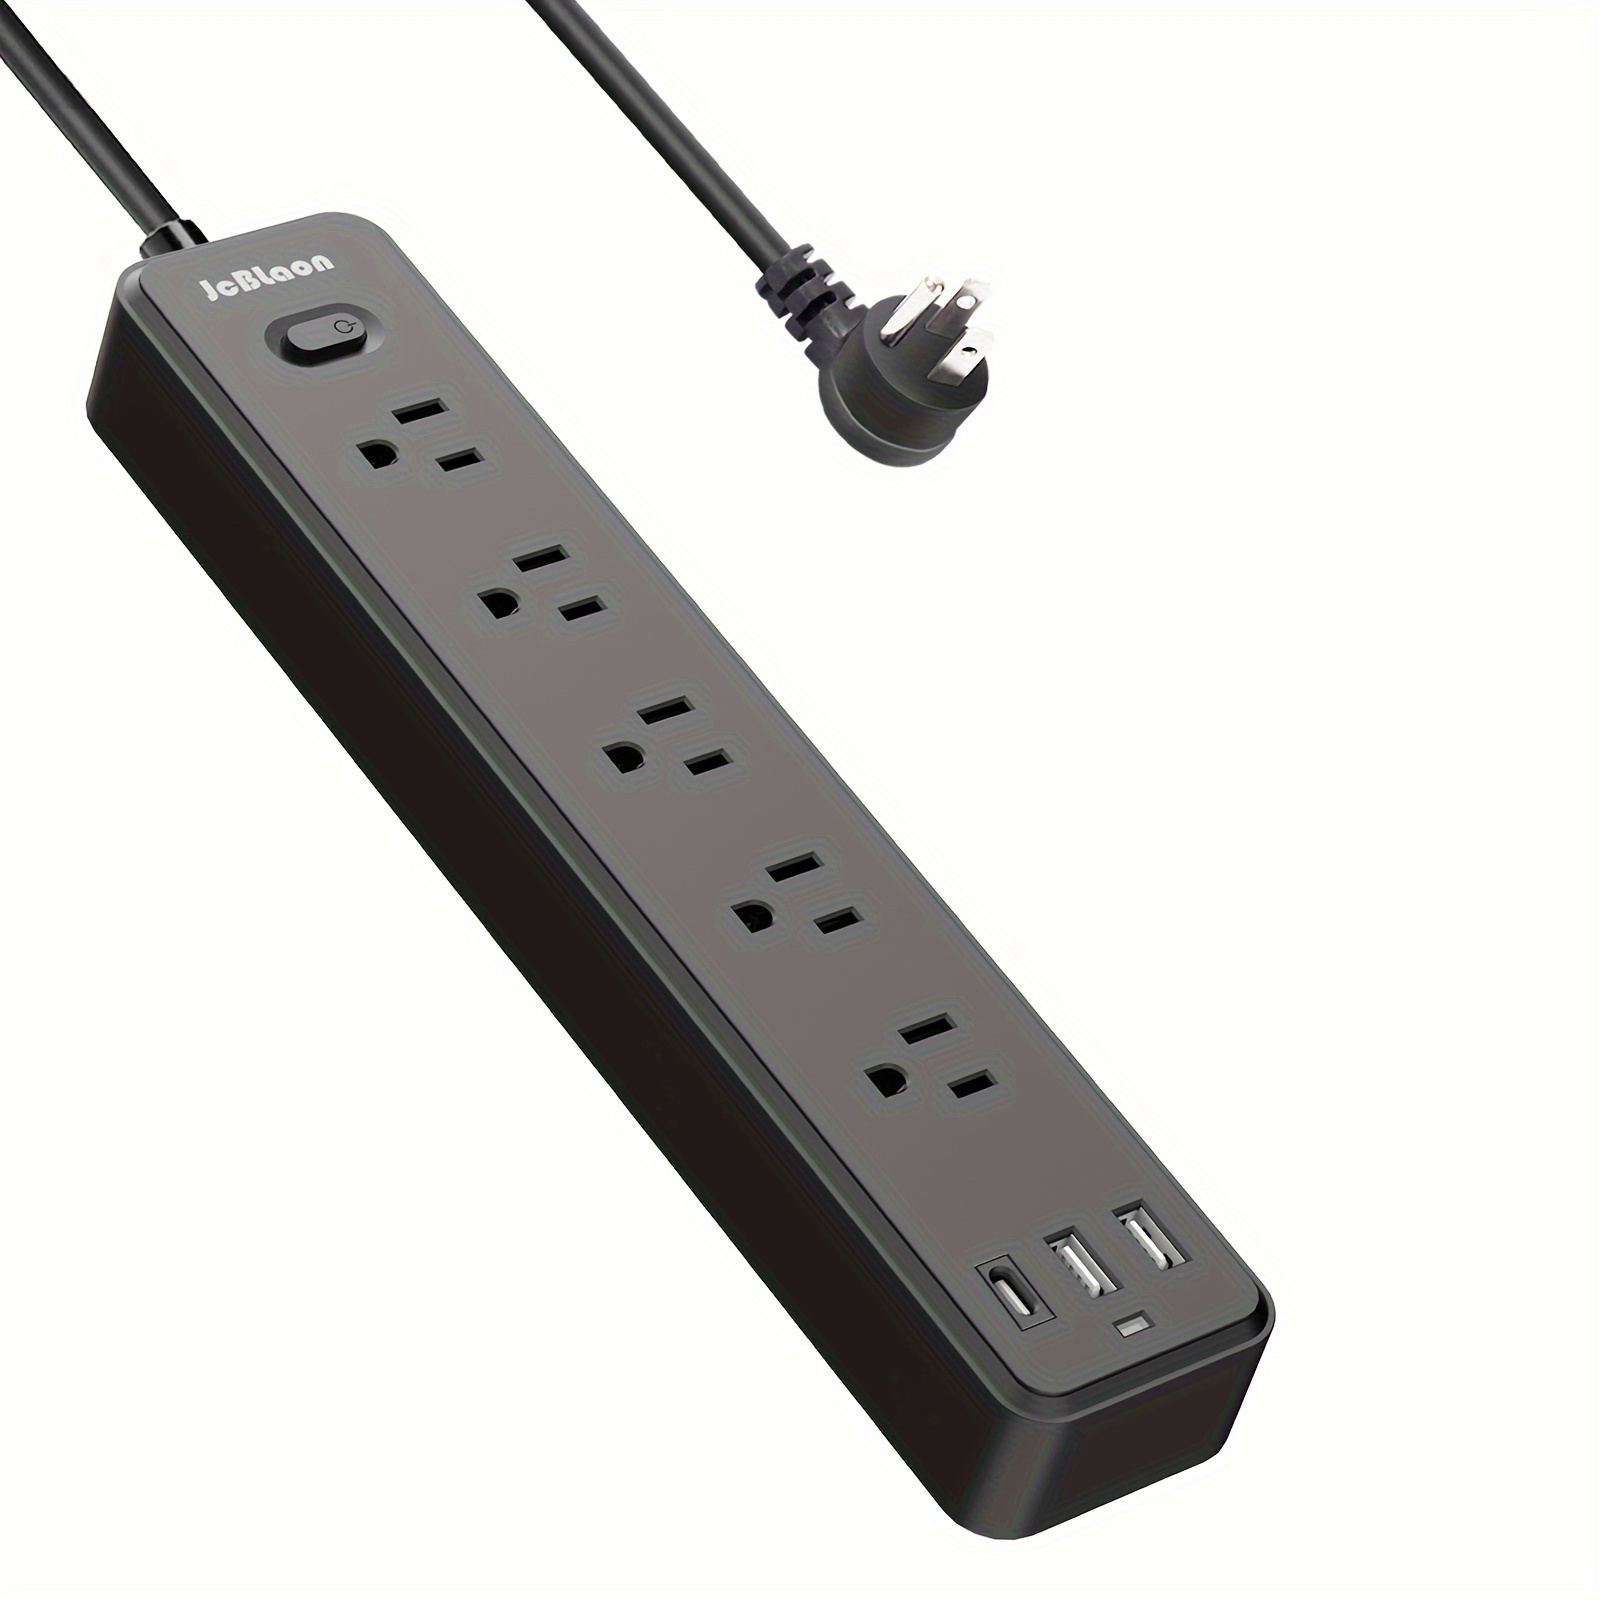 

6ft Power Strip Protector With 3 Usb Ports (1 Usb C), Flat Plug Extension Cord With 5 Ac Widely-spaced Outlets, Wall Mount, Desktop Charging Station For Home Office Dorm, 1050j